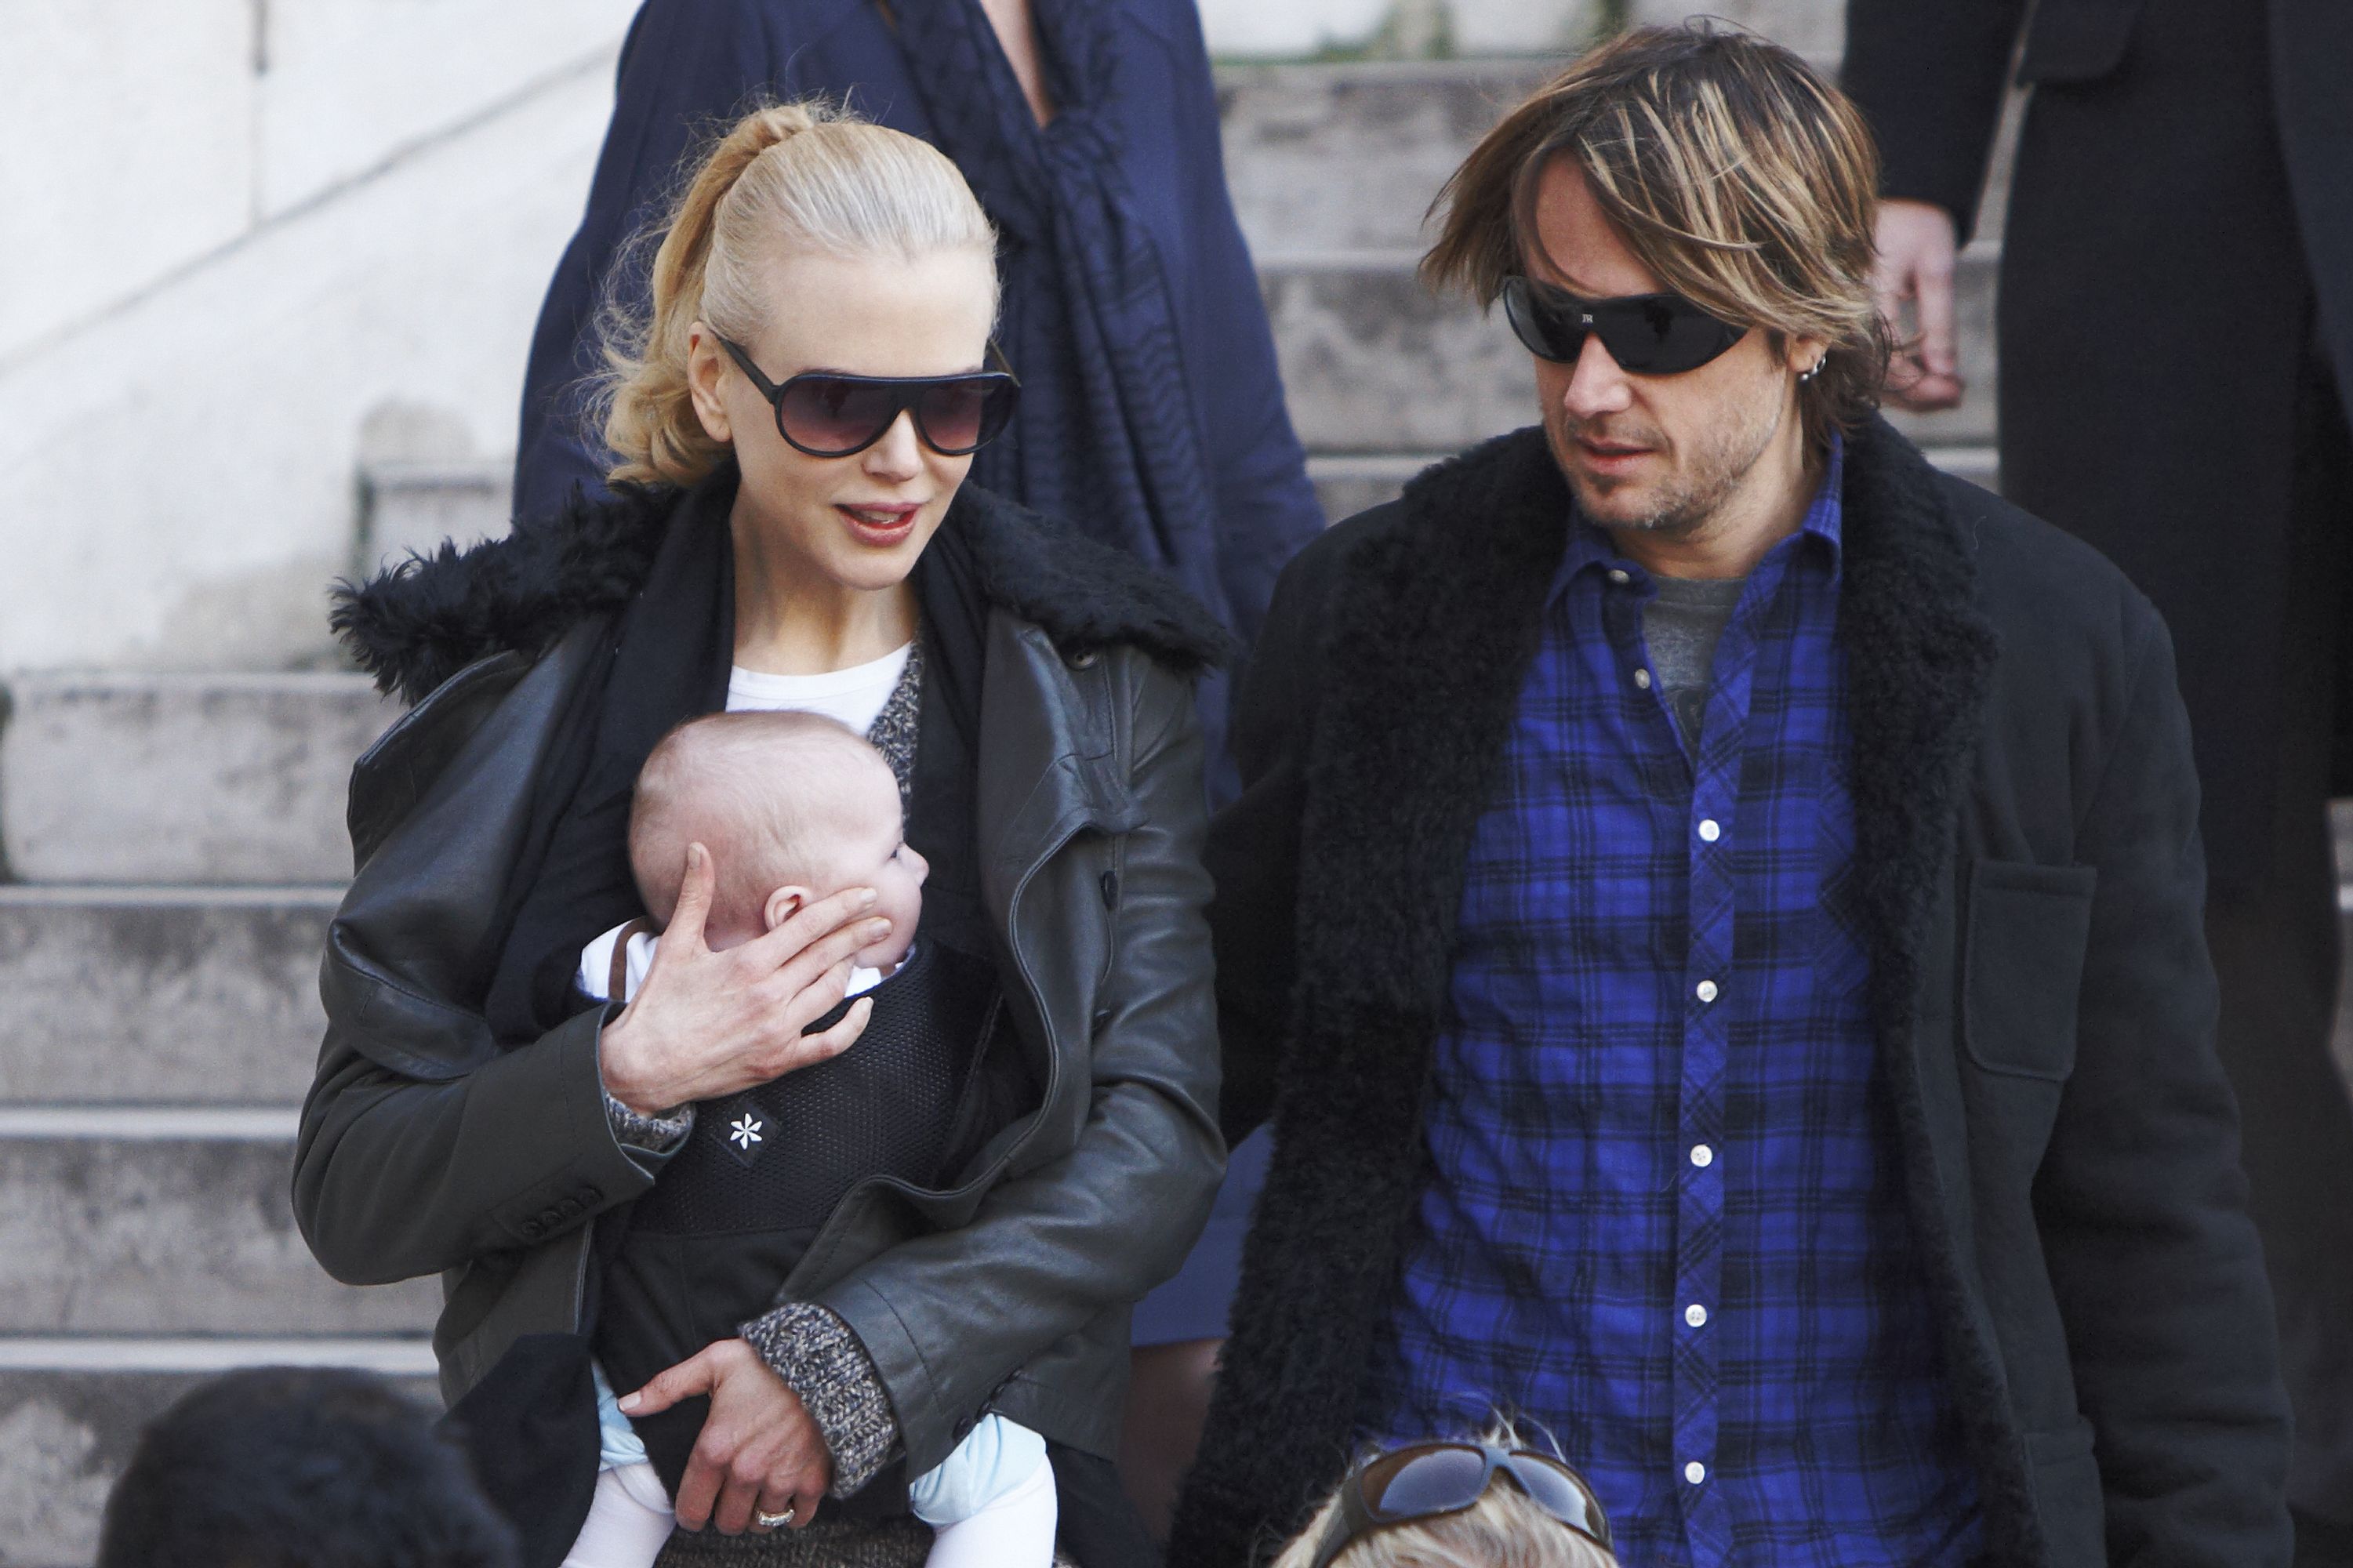 Keith Urban, Nicole Kidman and their baby on December 2, 2008, in Paris, France. | Source: Getty Images